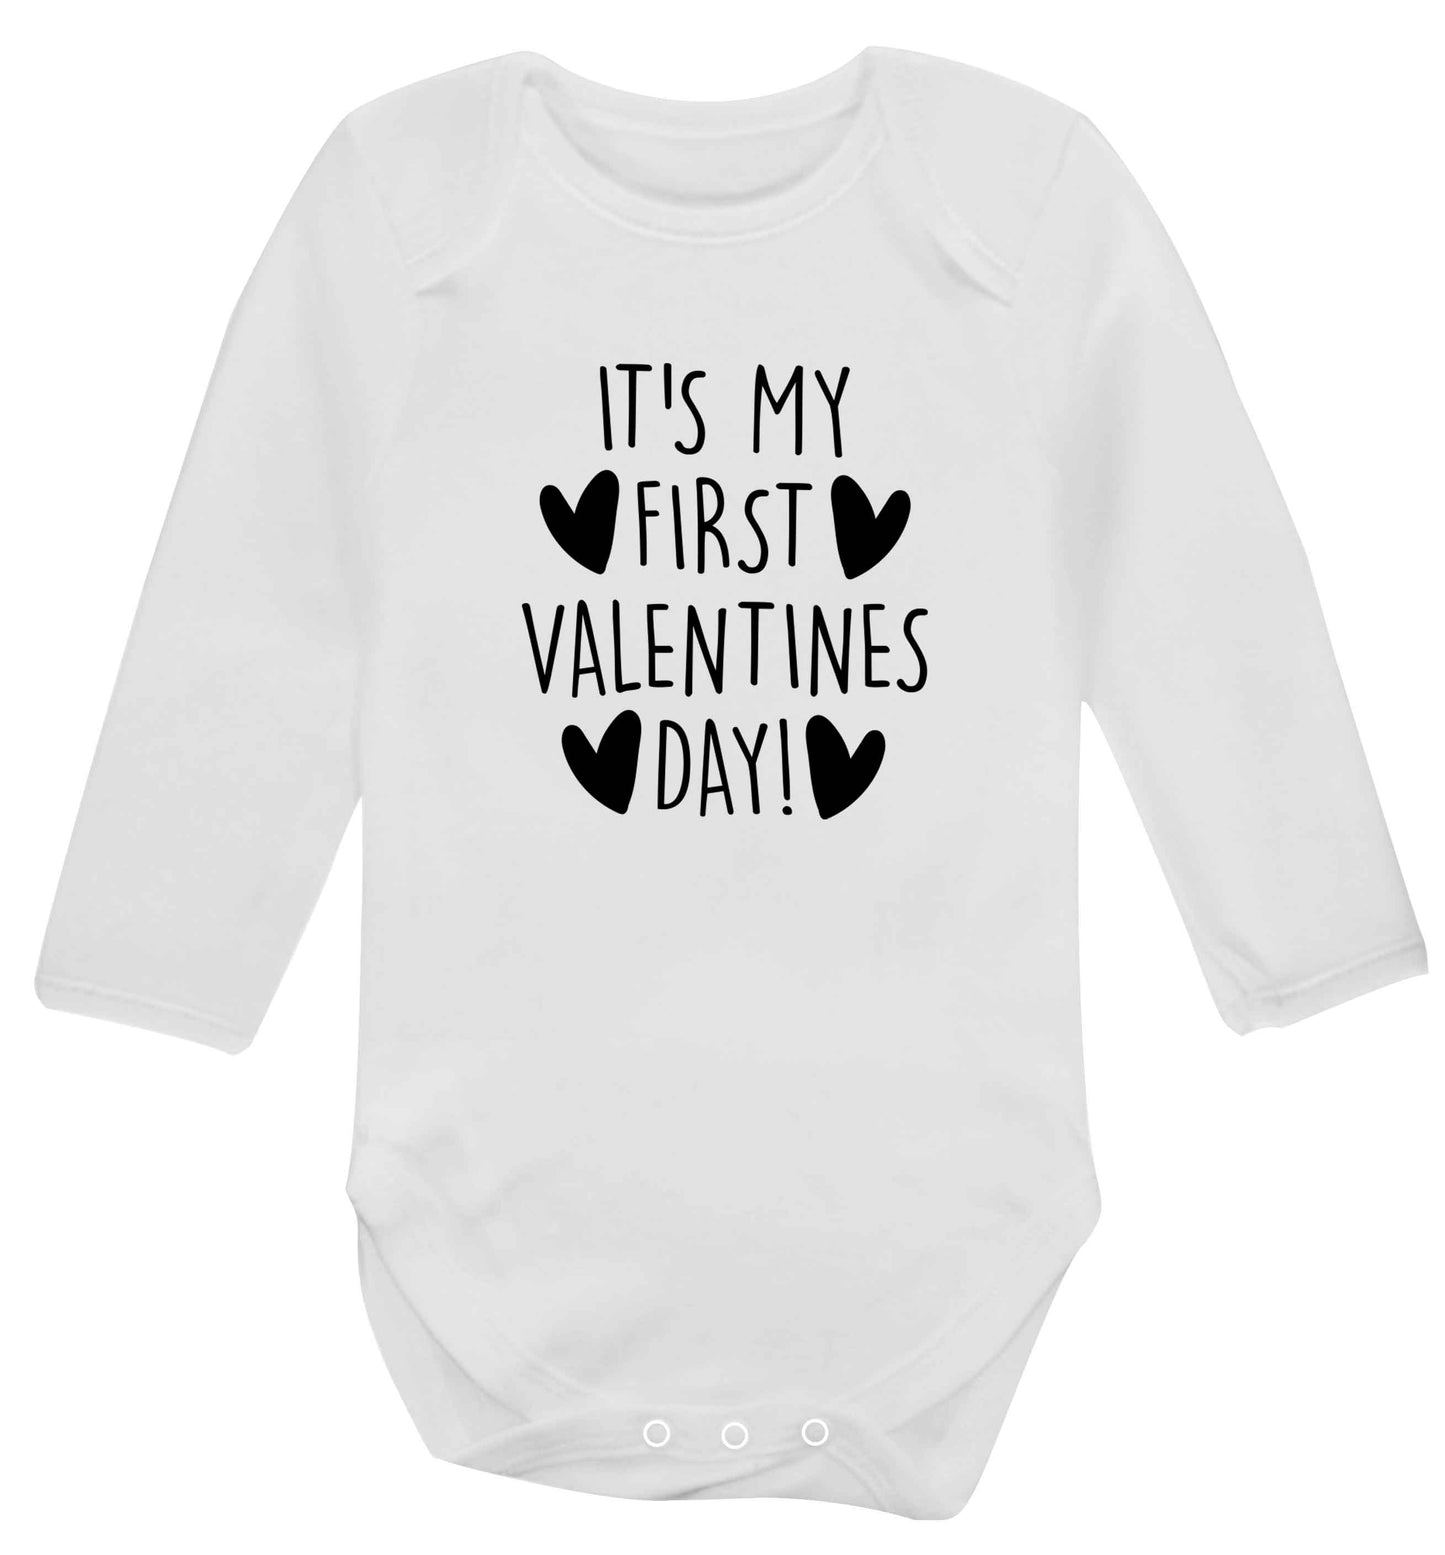 It's my first valentines day! baby vest long sleeved white 6-12 months